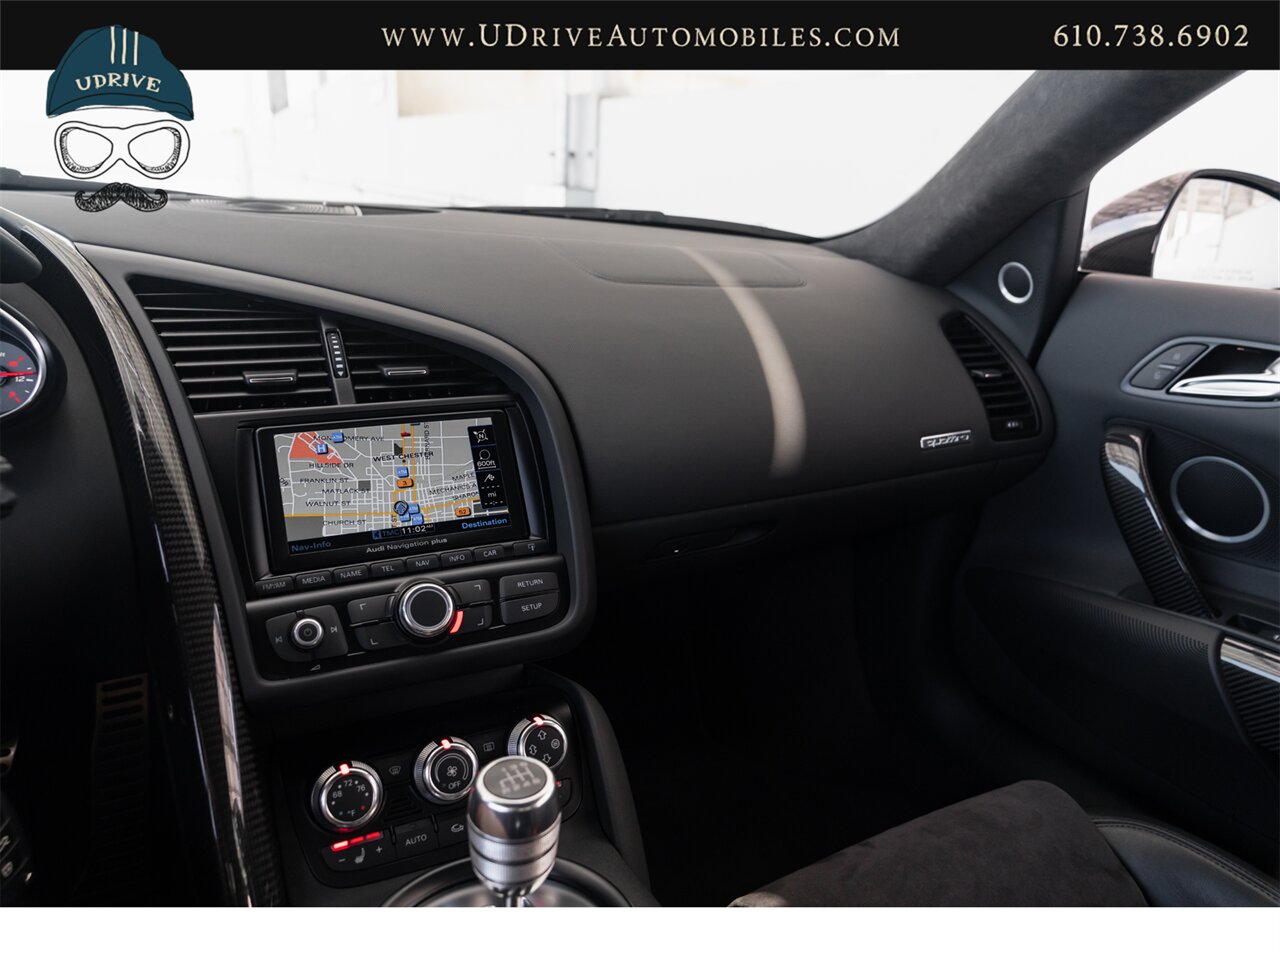 2012 Audi R8 4.2 Quattro  6 Speed Manual 1 Owner Service History - Photo 39 - West Chester, PA 19382